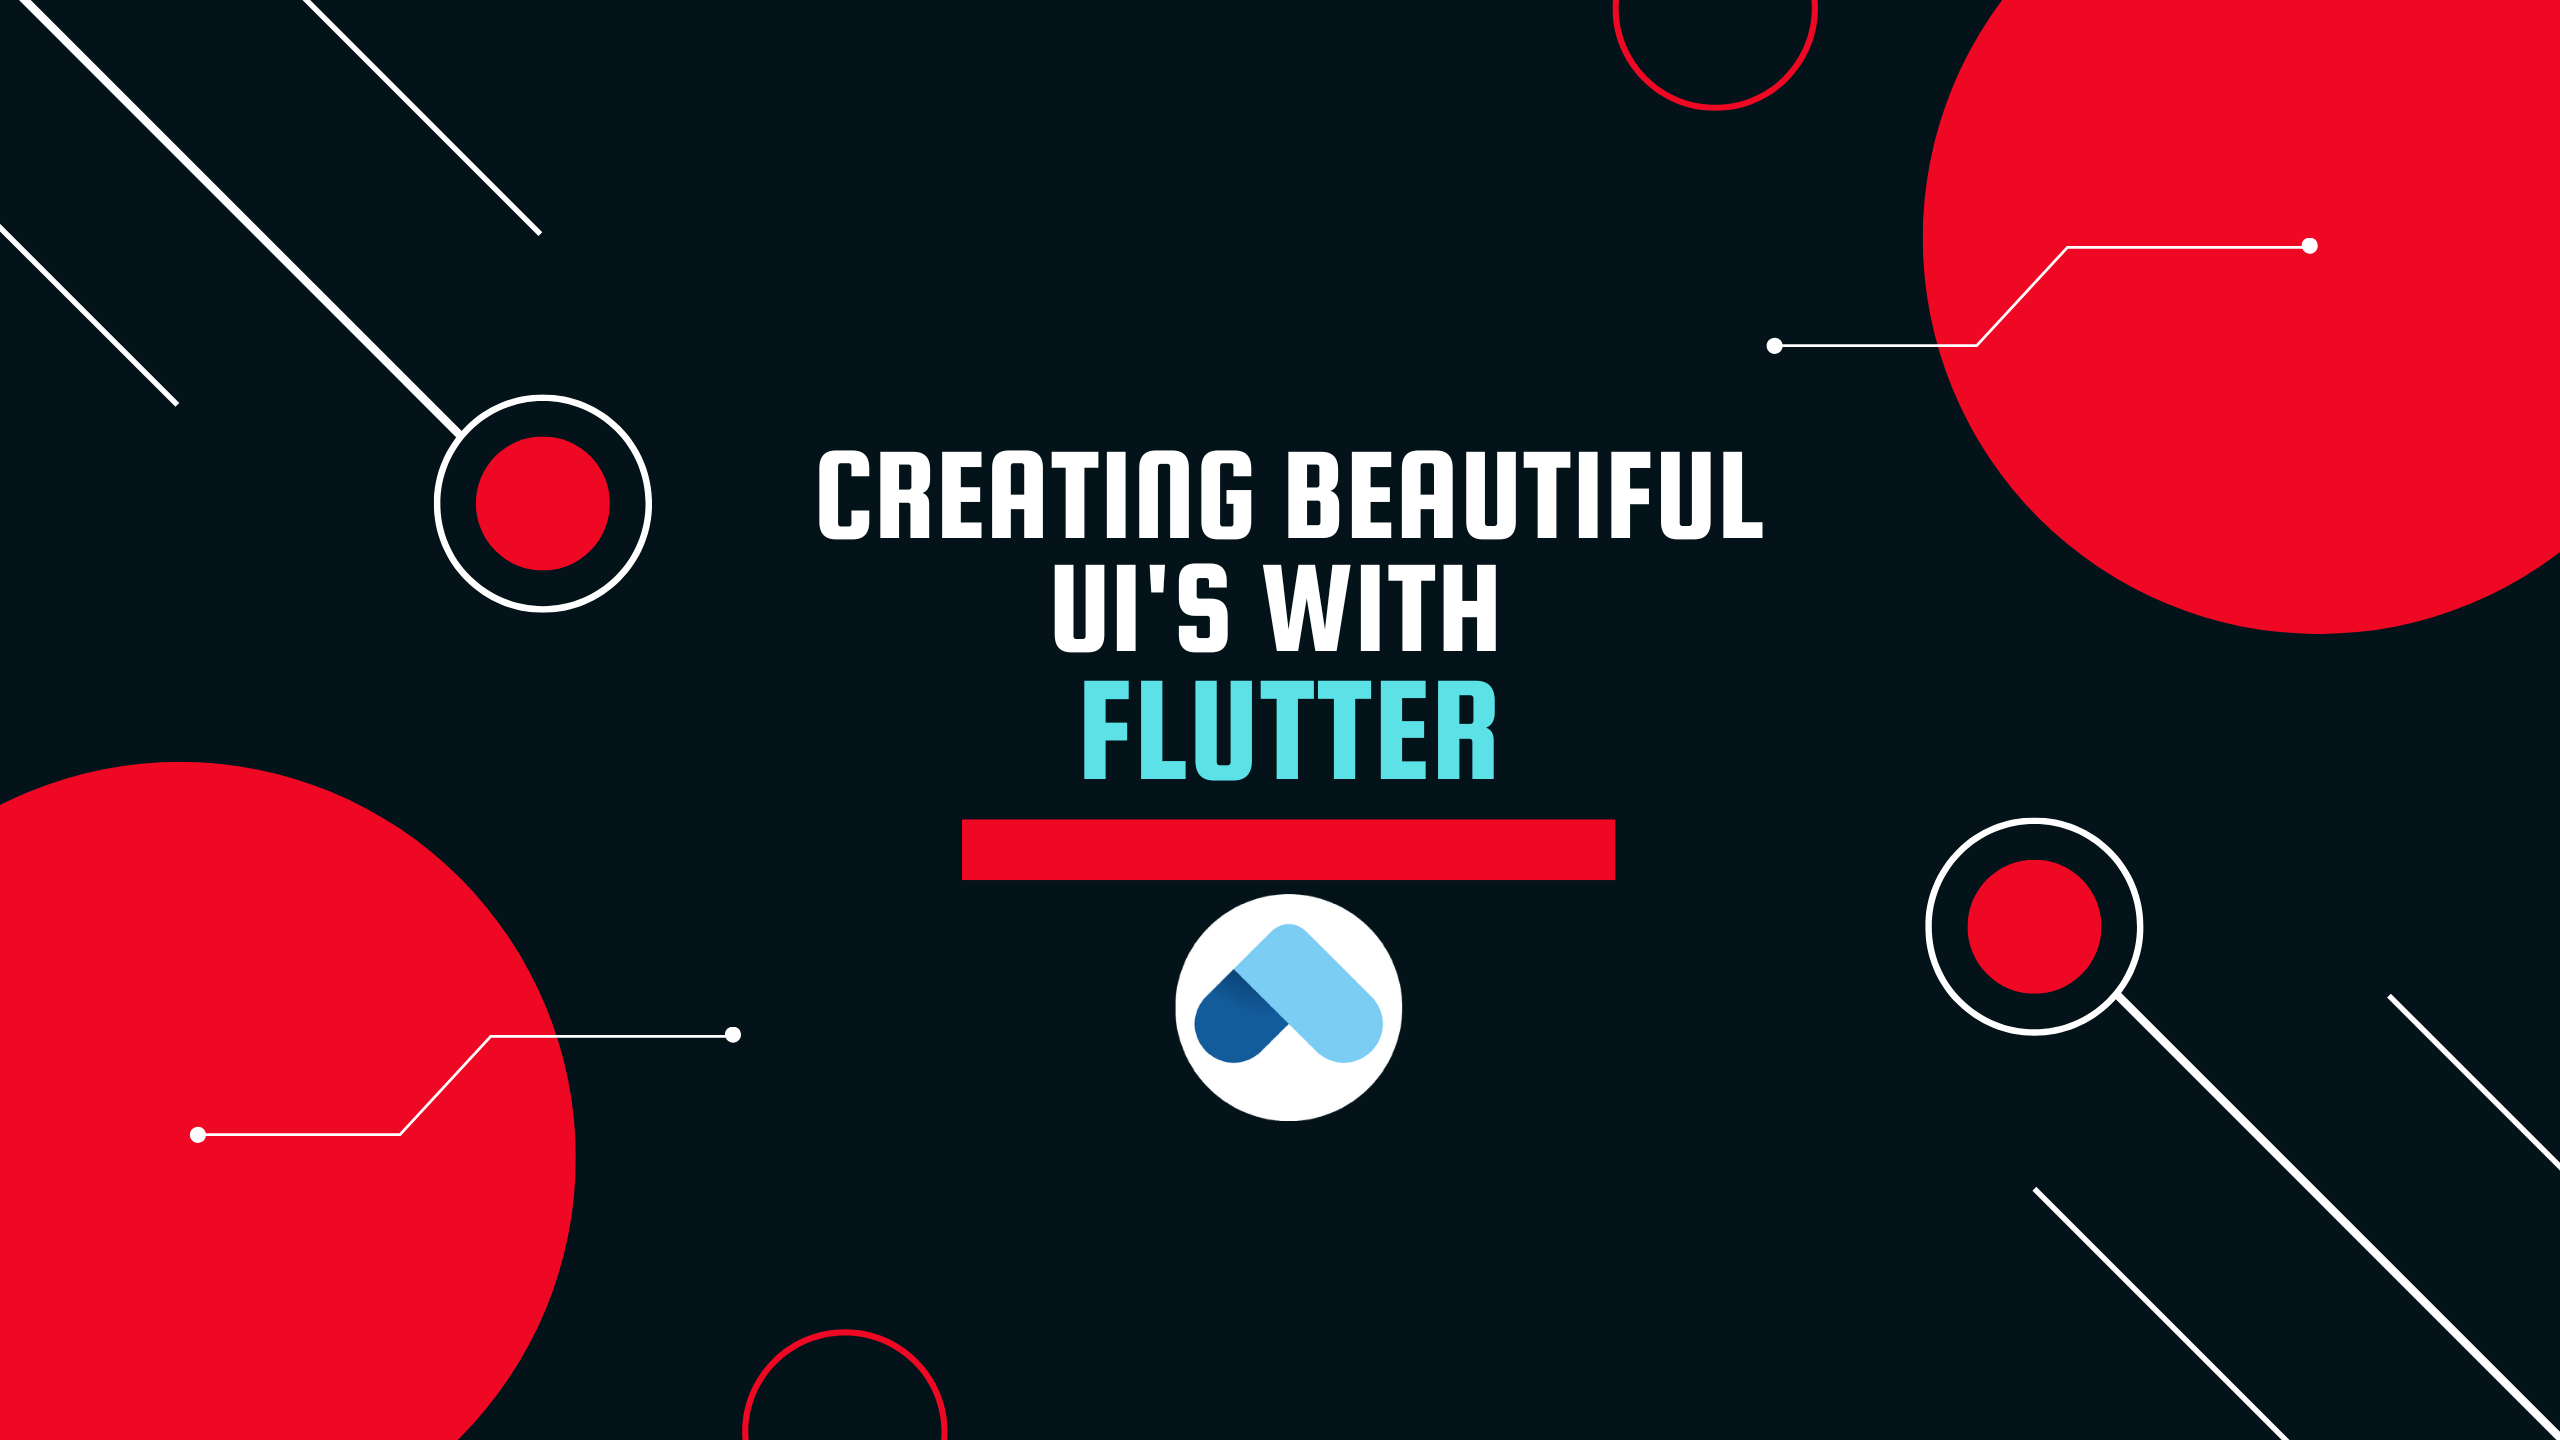 Creating beautiful UIs with Flutter: Best practices and tips